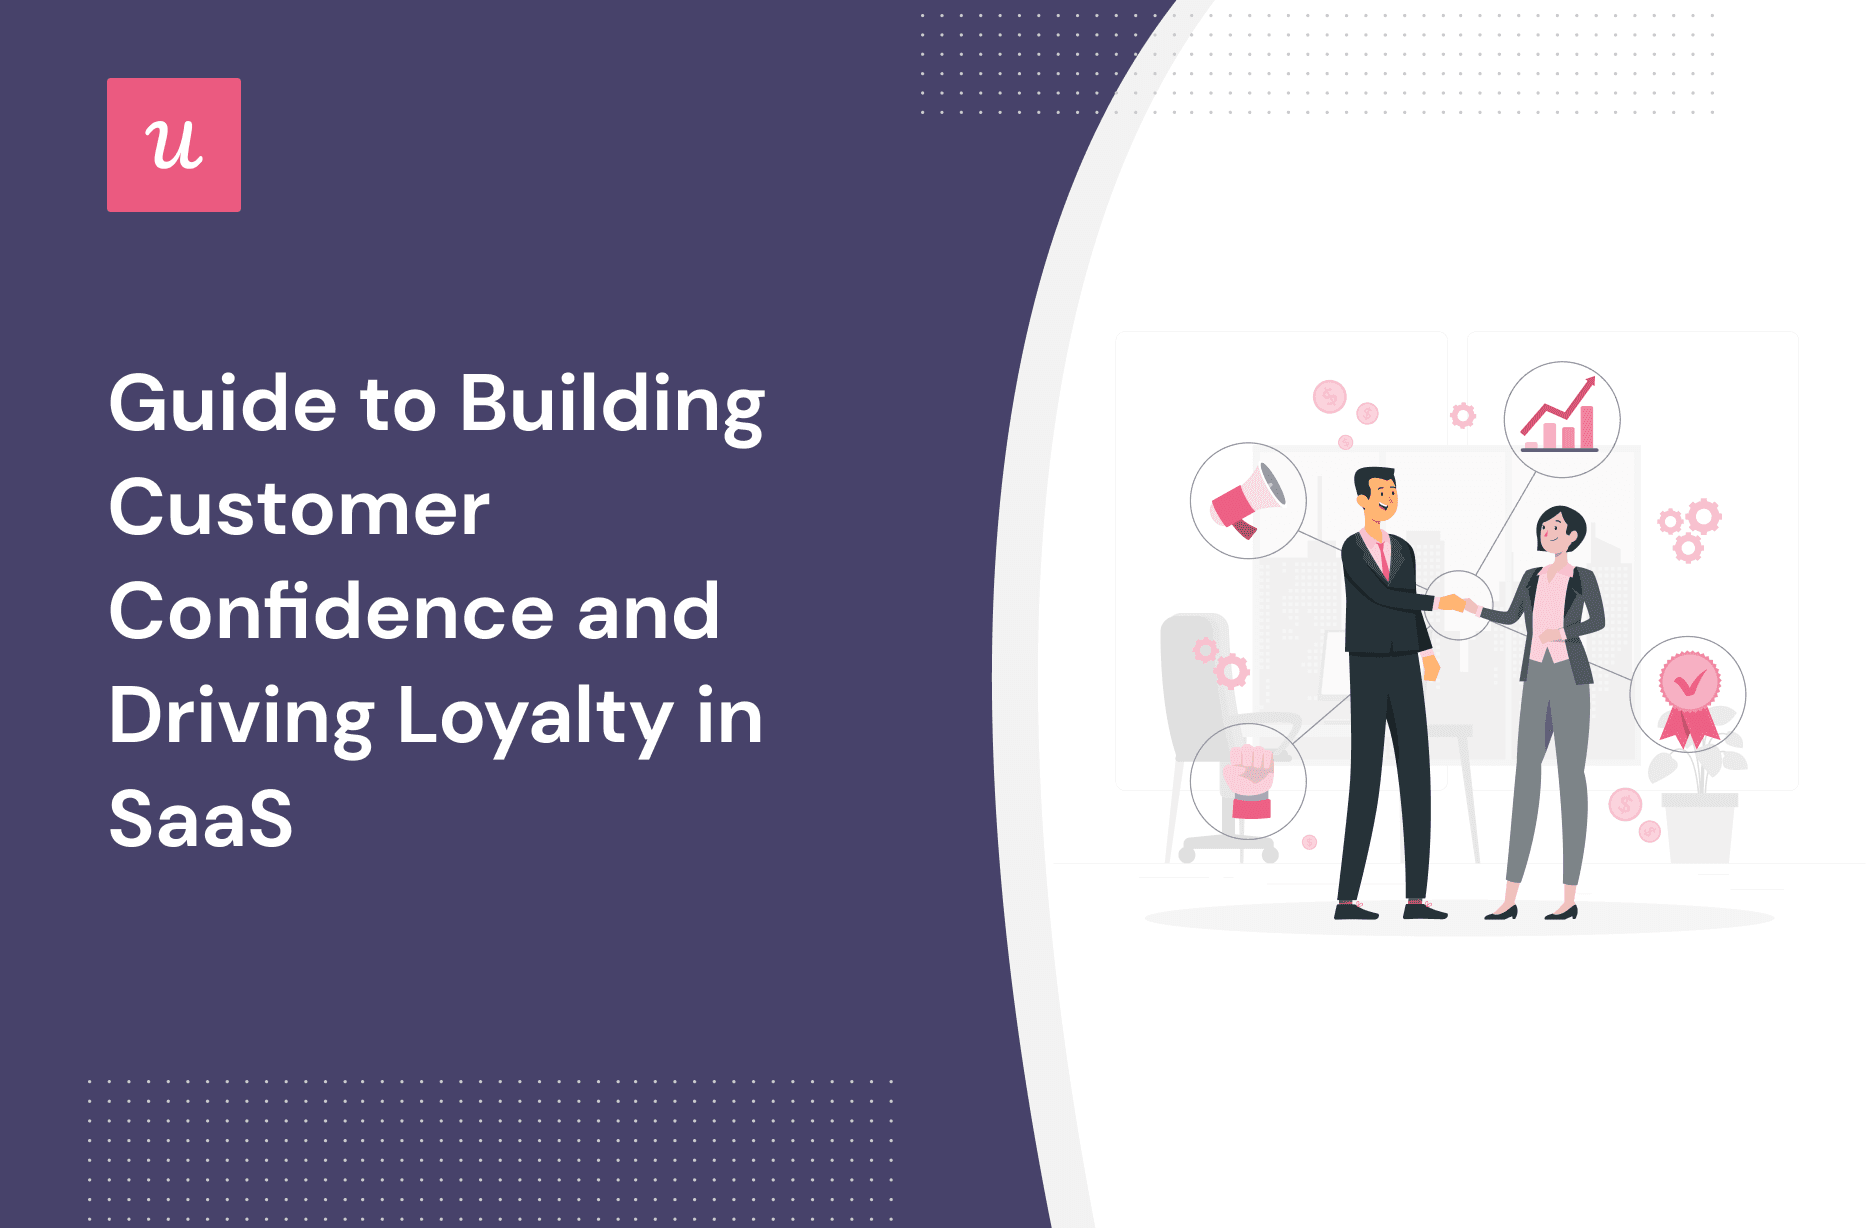 Guide to Building Customer Confidence and Driving Loyalty in SaaS cover